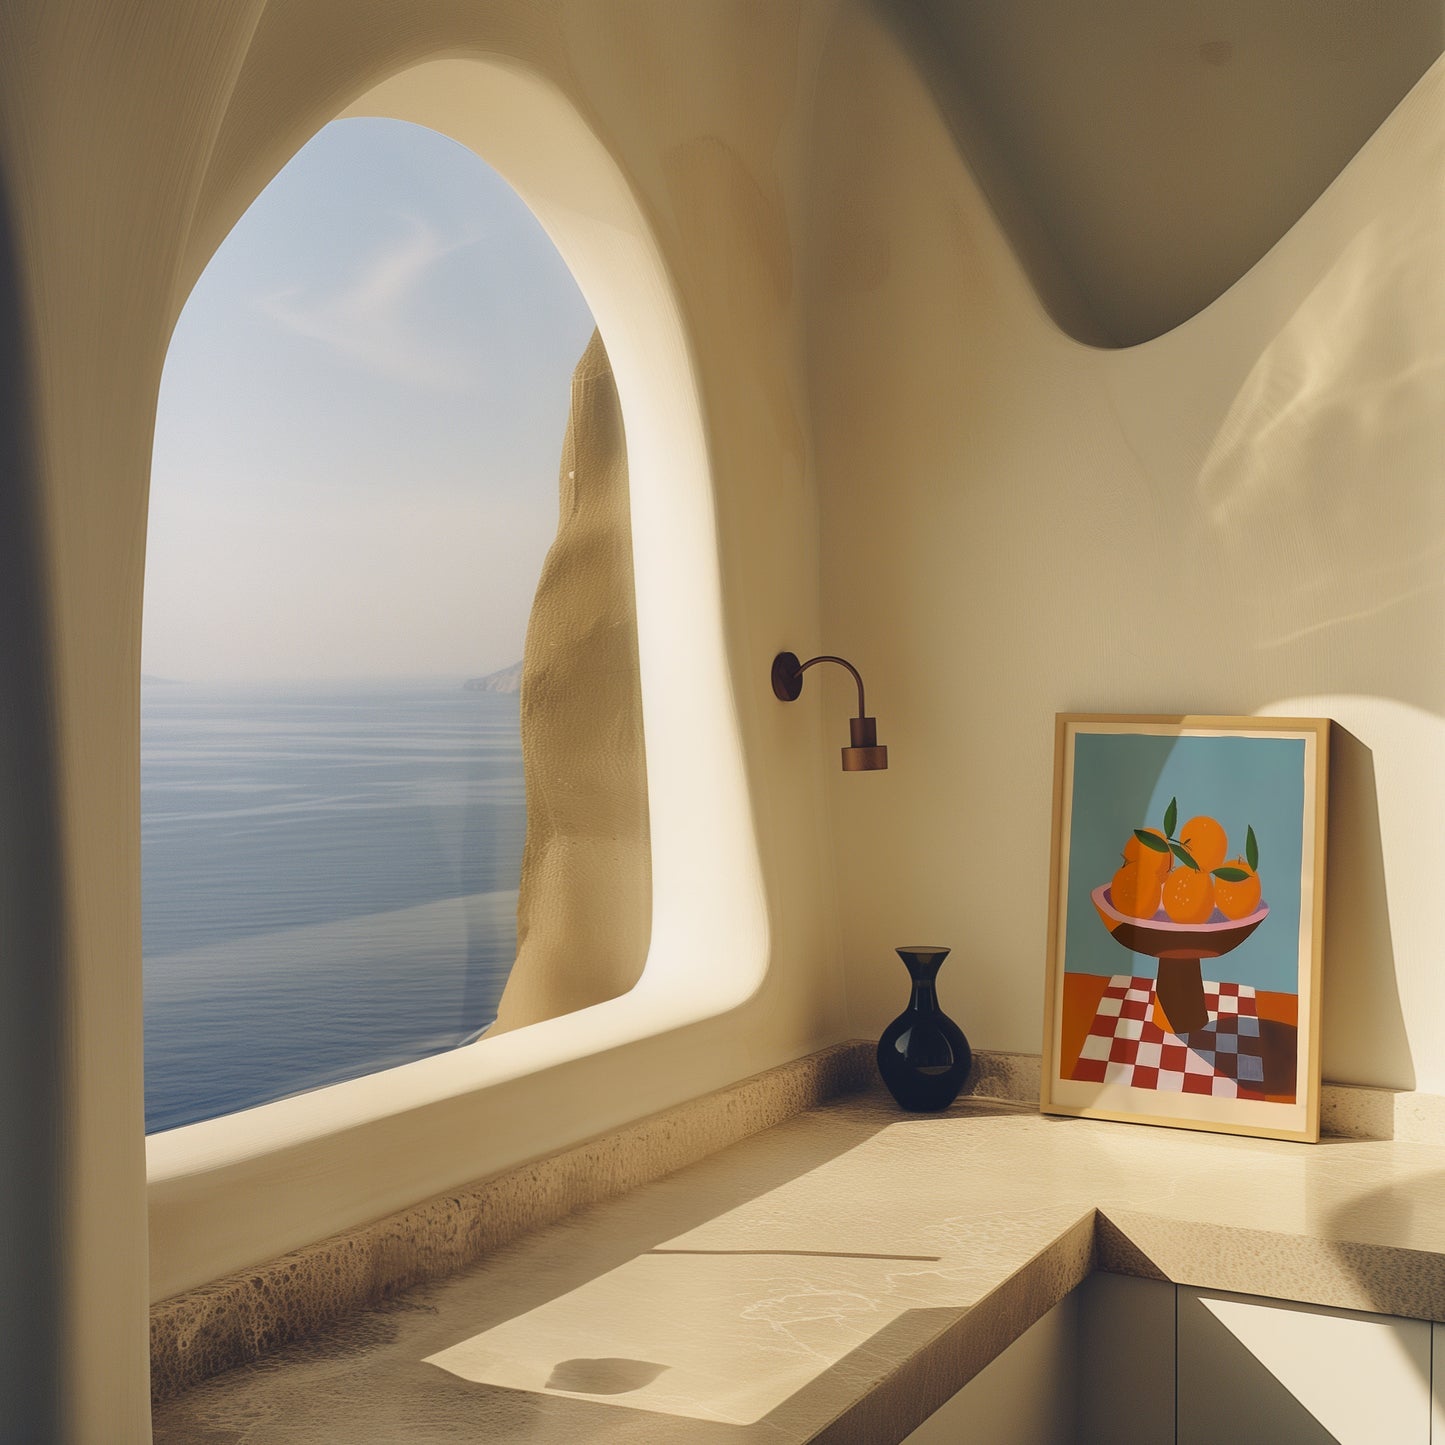 Seaside room with smooth walls, arched window, and painting next to a vase.